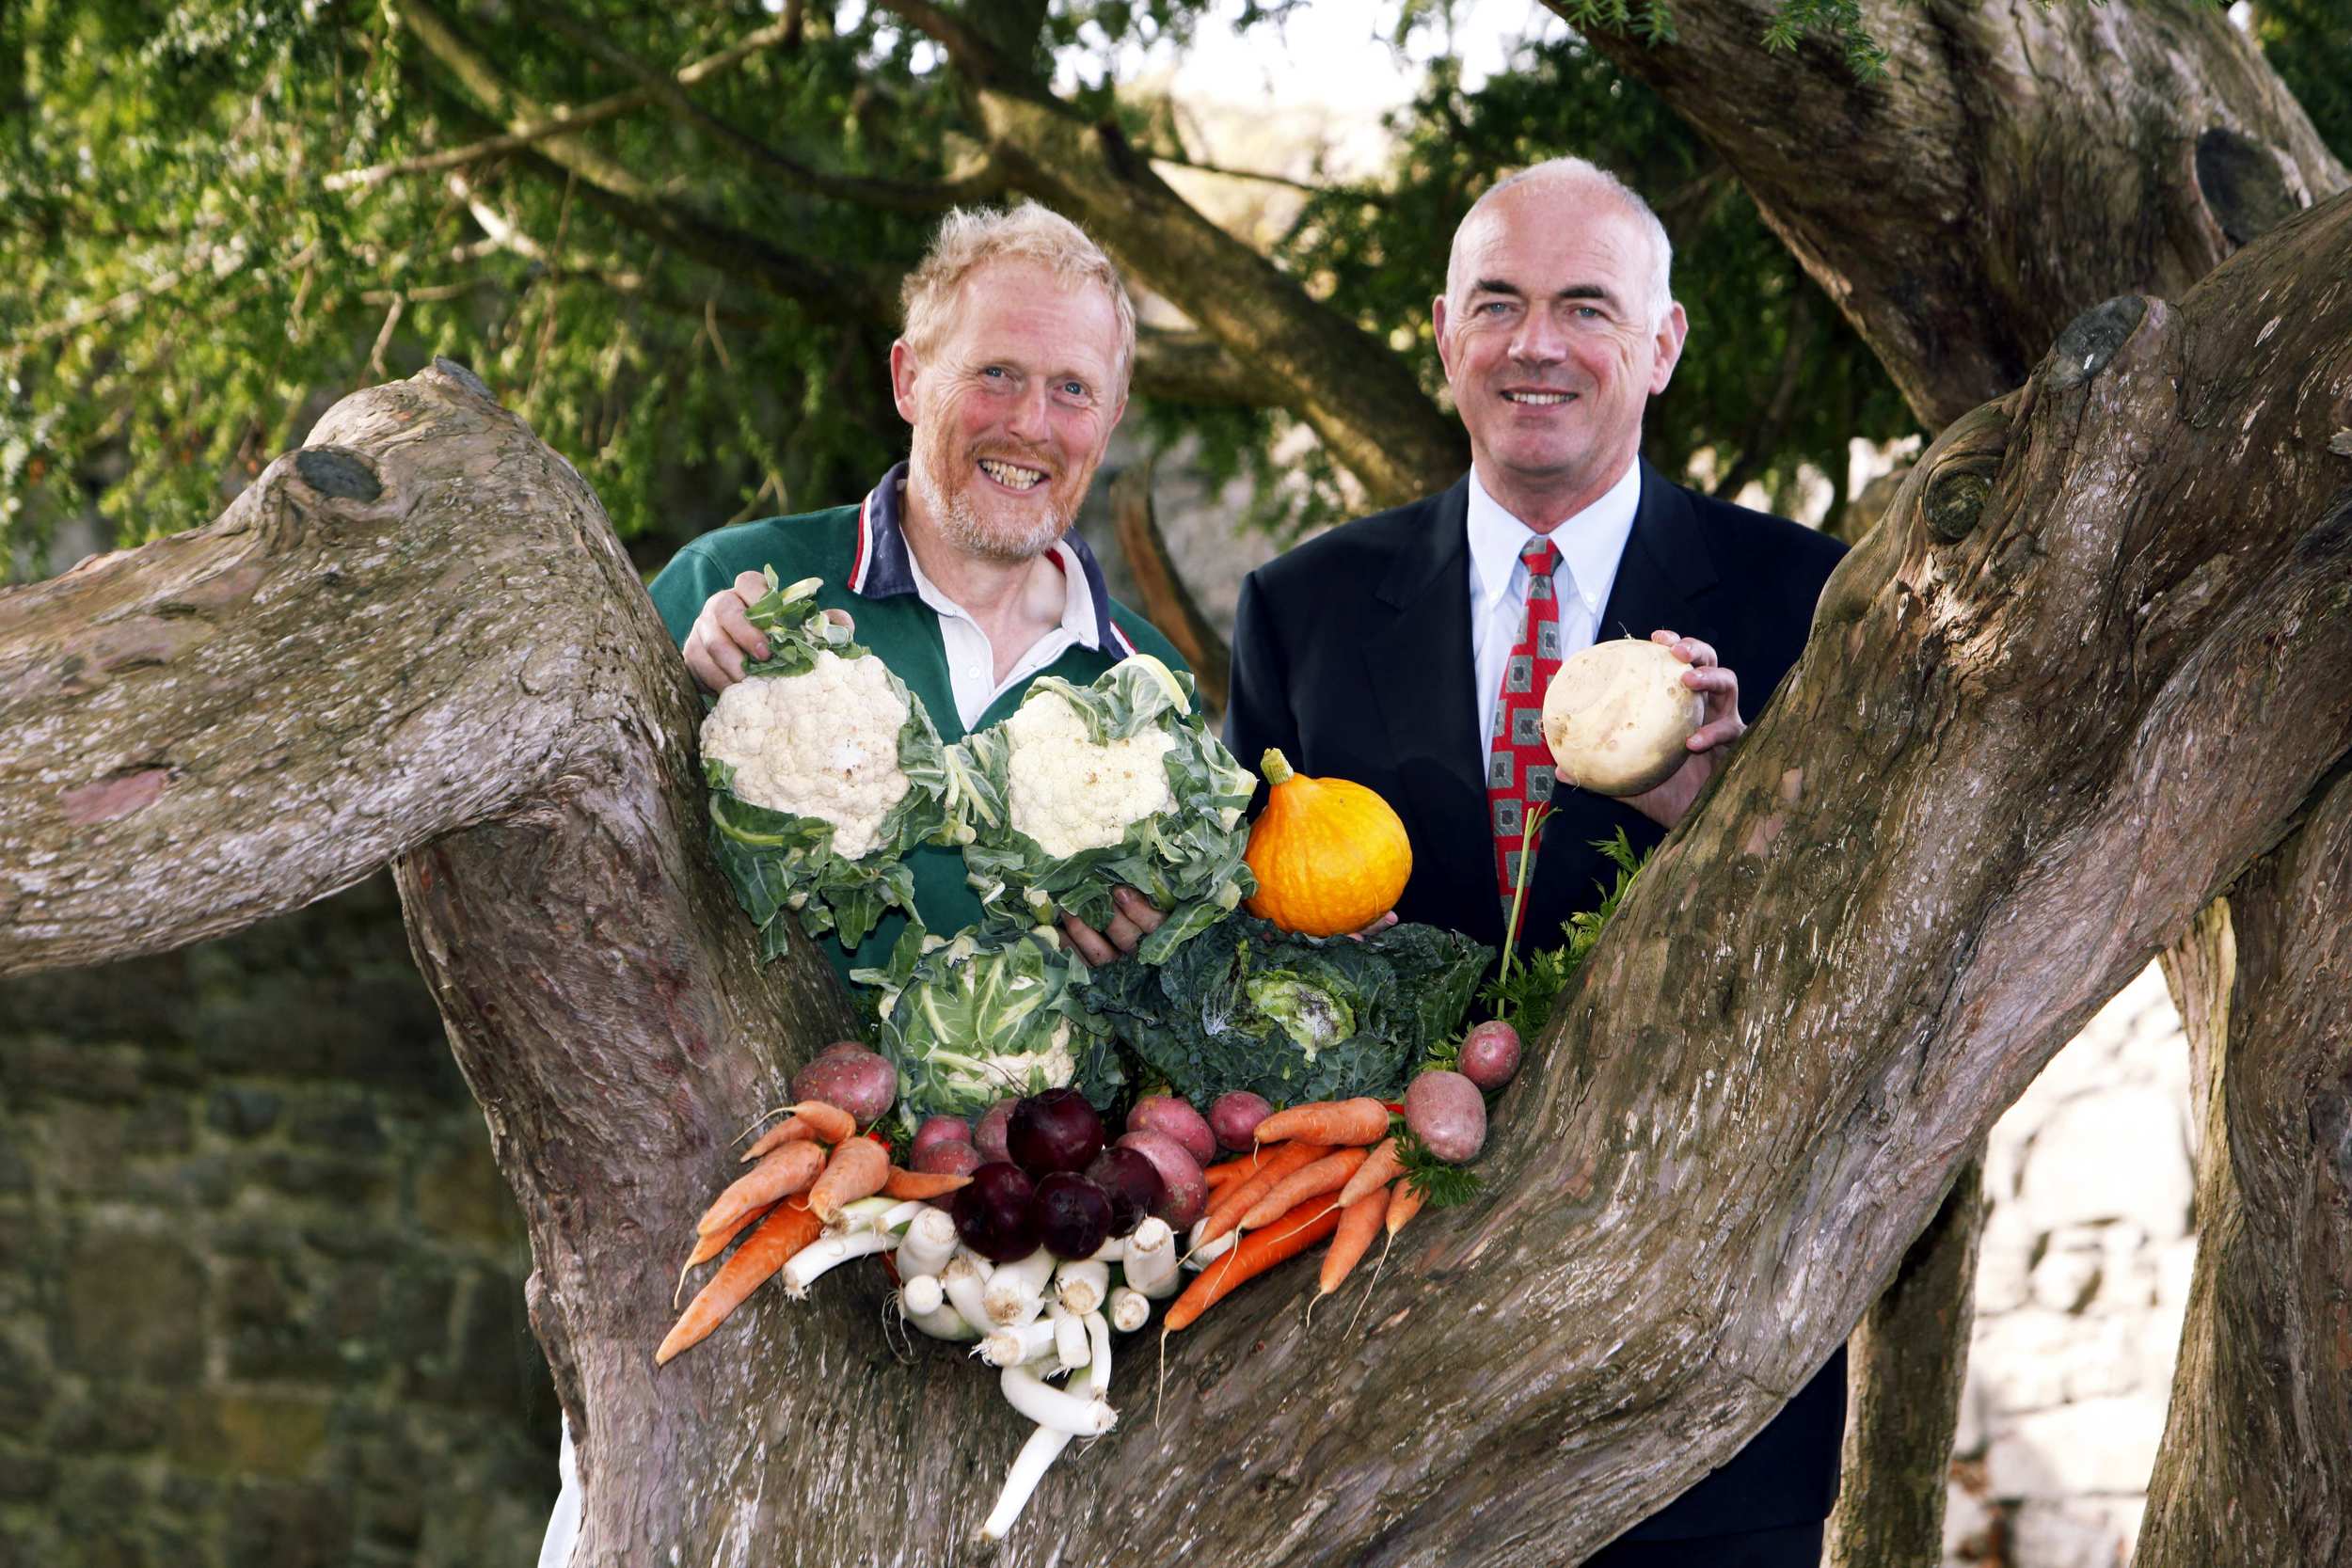  Norman Kenny, Organic Producer with Mel O'Rourke, Director of Organic Focus, Bord Bia, for Bord Bia promotion of local markets 